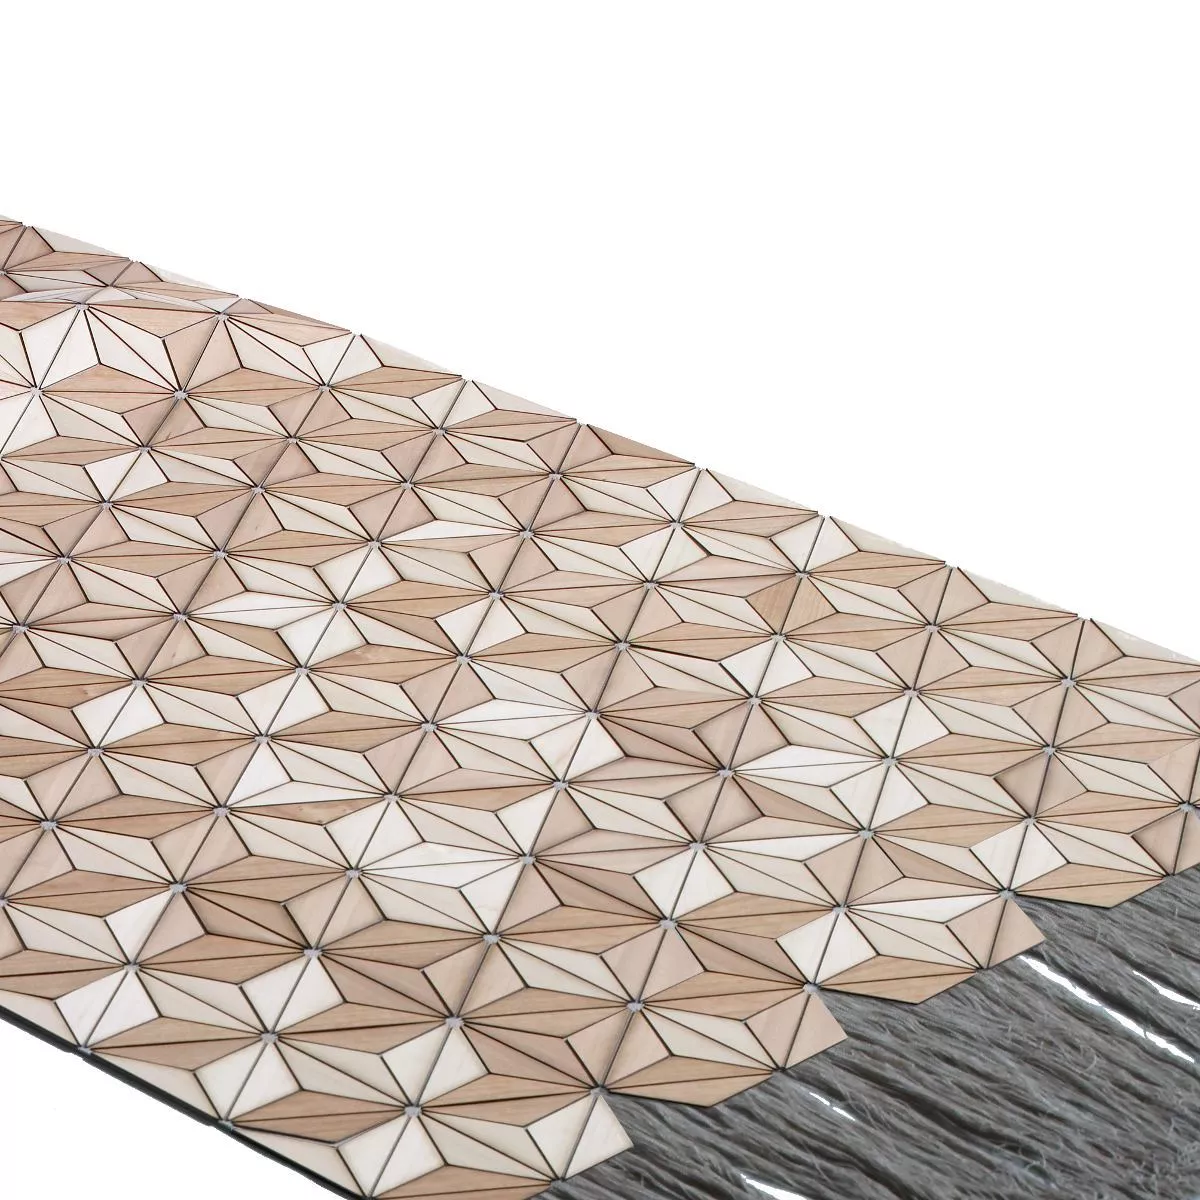 Design rug "Ashdown" made of wood and linen